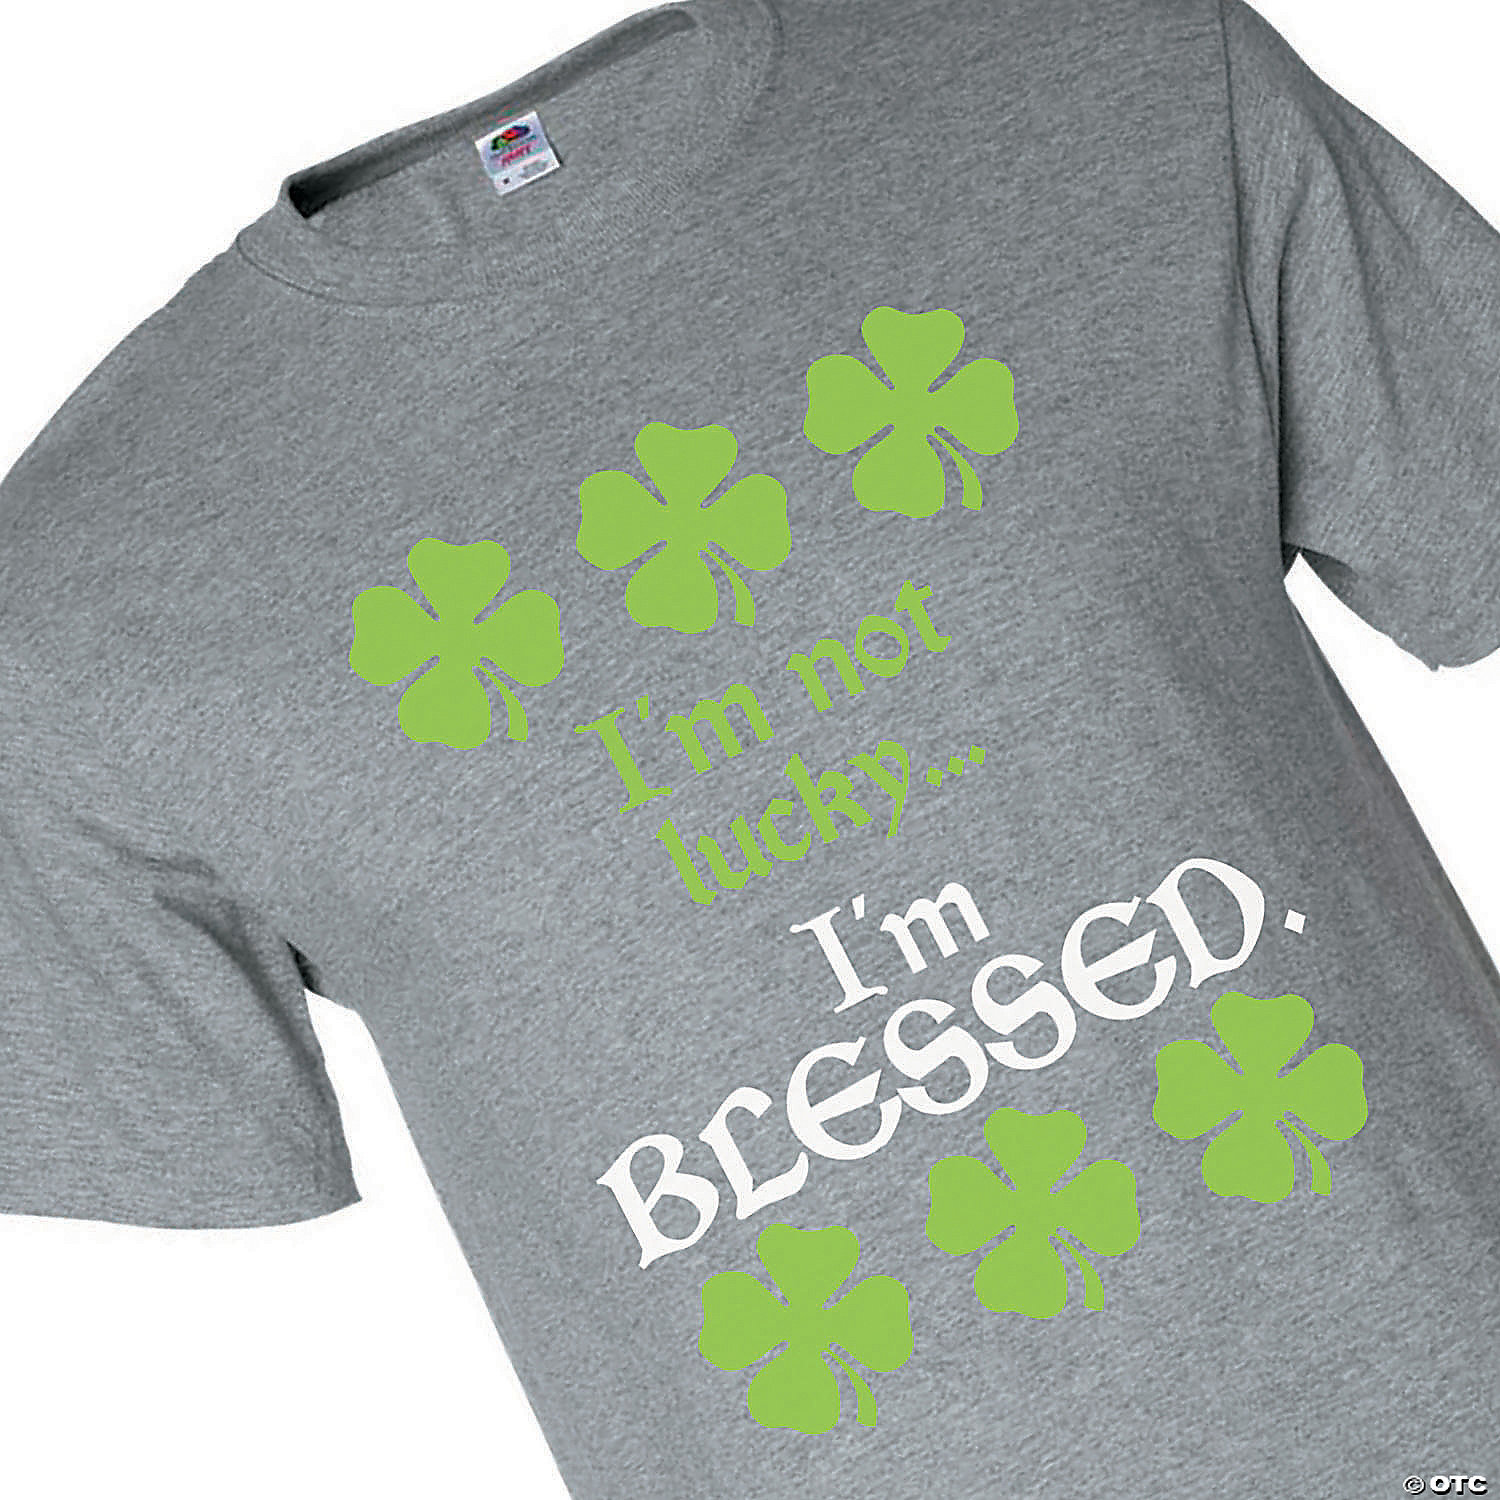 Irish Tee Lucky Shirt Lucky Smiley Face Shirt Trendy St Pattys Day Teacher St Paddy's Day Shirts St Patricks Day T-Shirt Y2K Smile Tee